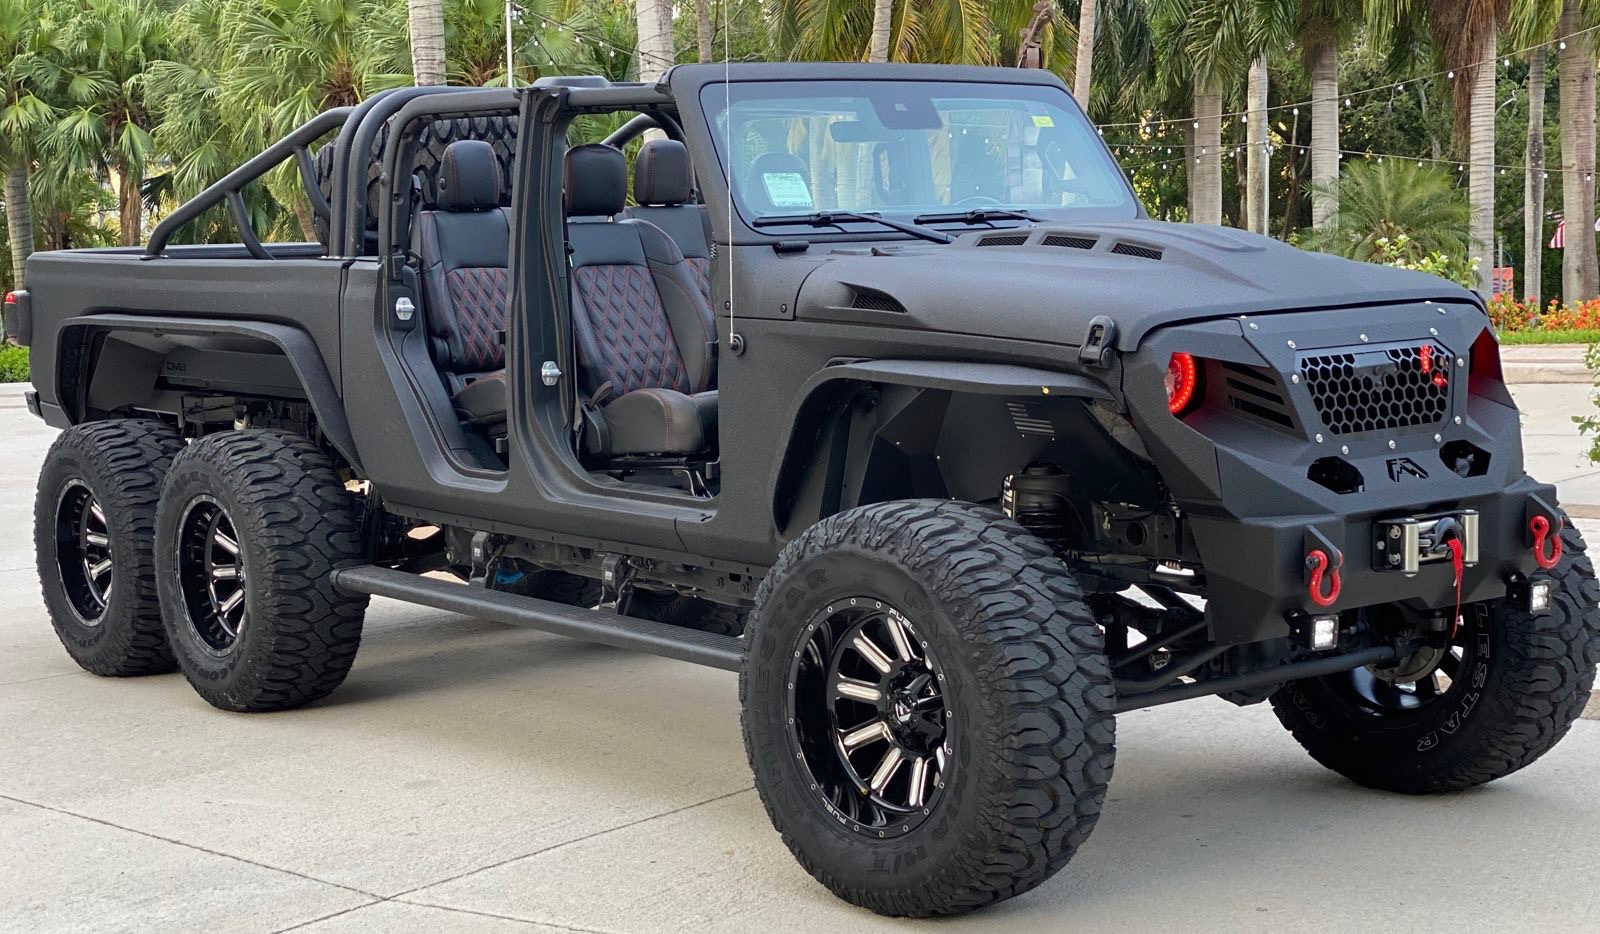 This Jeep Gladiator 6x6 conversion is coated in Kevlar and ready for any  terrain